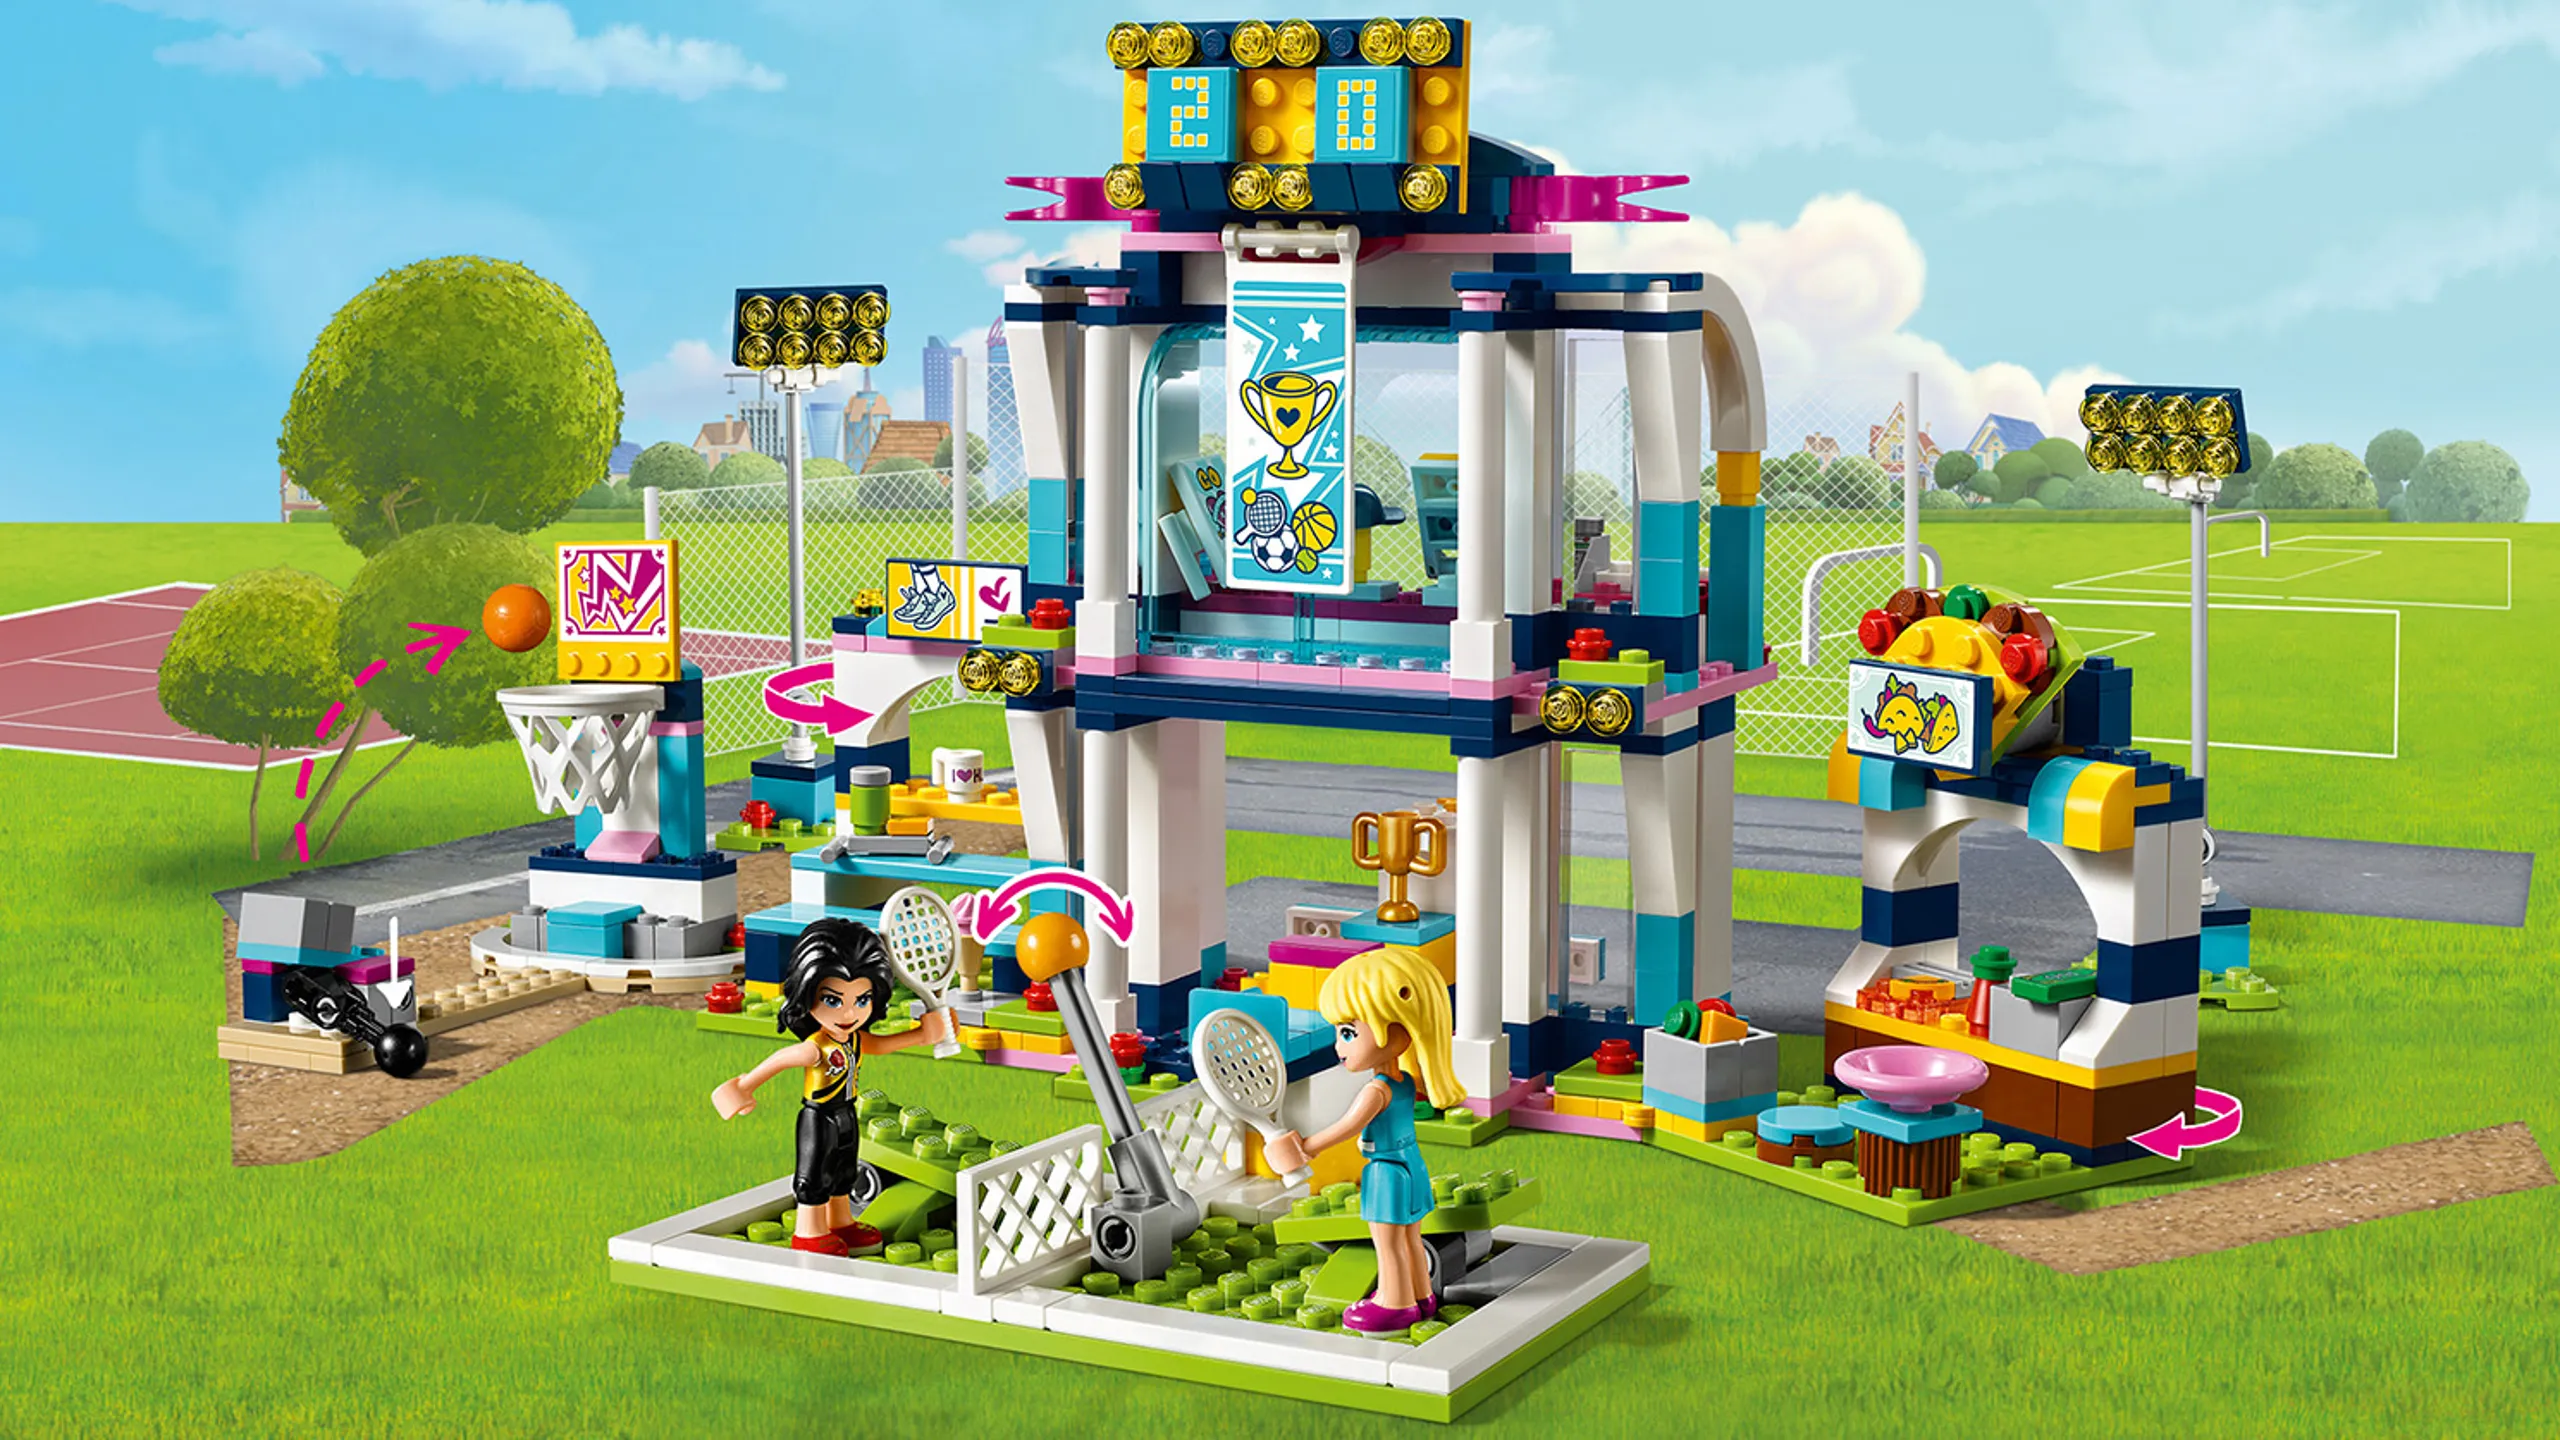 LEGO Friends Stephanie's Sports Arena - 41338 - Meet up with Stephanie to keep fit and play at the sports center. Head over to the basketball arena, or practice your aim by pressing the button to shoot basketballs into the net. Take a seat in the stand to watch Stephanie take on her biggest rival Vicky Roman in a tennis match! Grab a taco after the match and buy a souvenir in your team's colours from the souvenir shop upstairs.